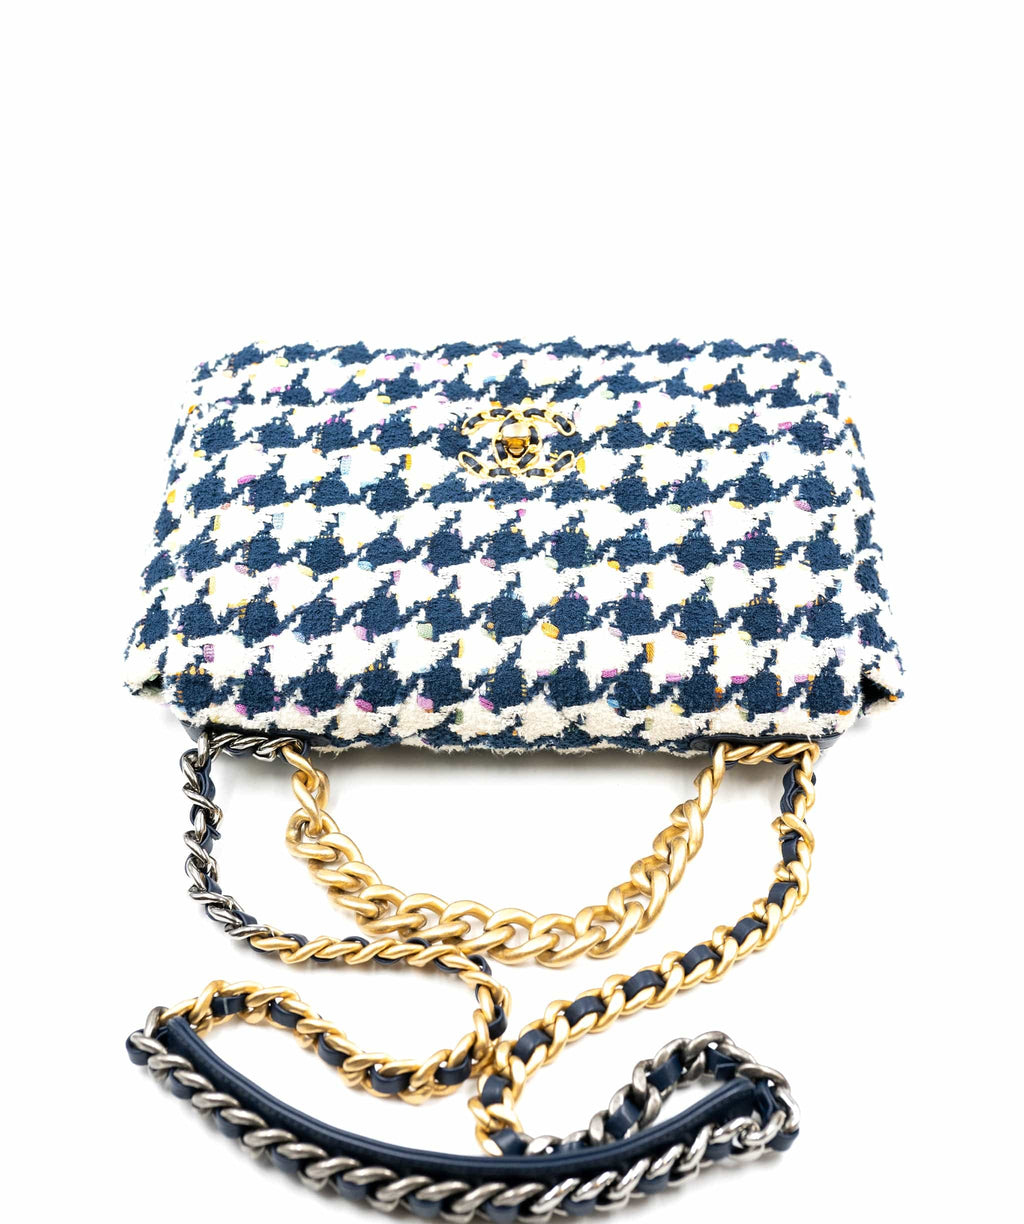 Chanel 21P Small Navy Multicolor Tweed Houndstooth Ribbon 19 Flap Bag  30ccs12